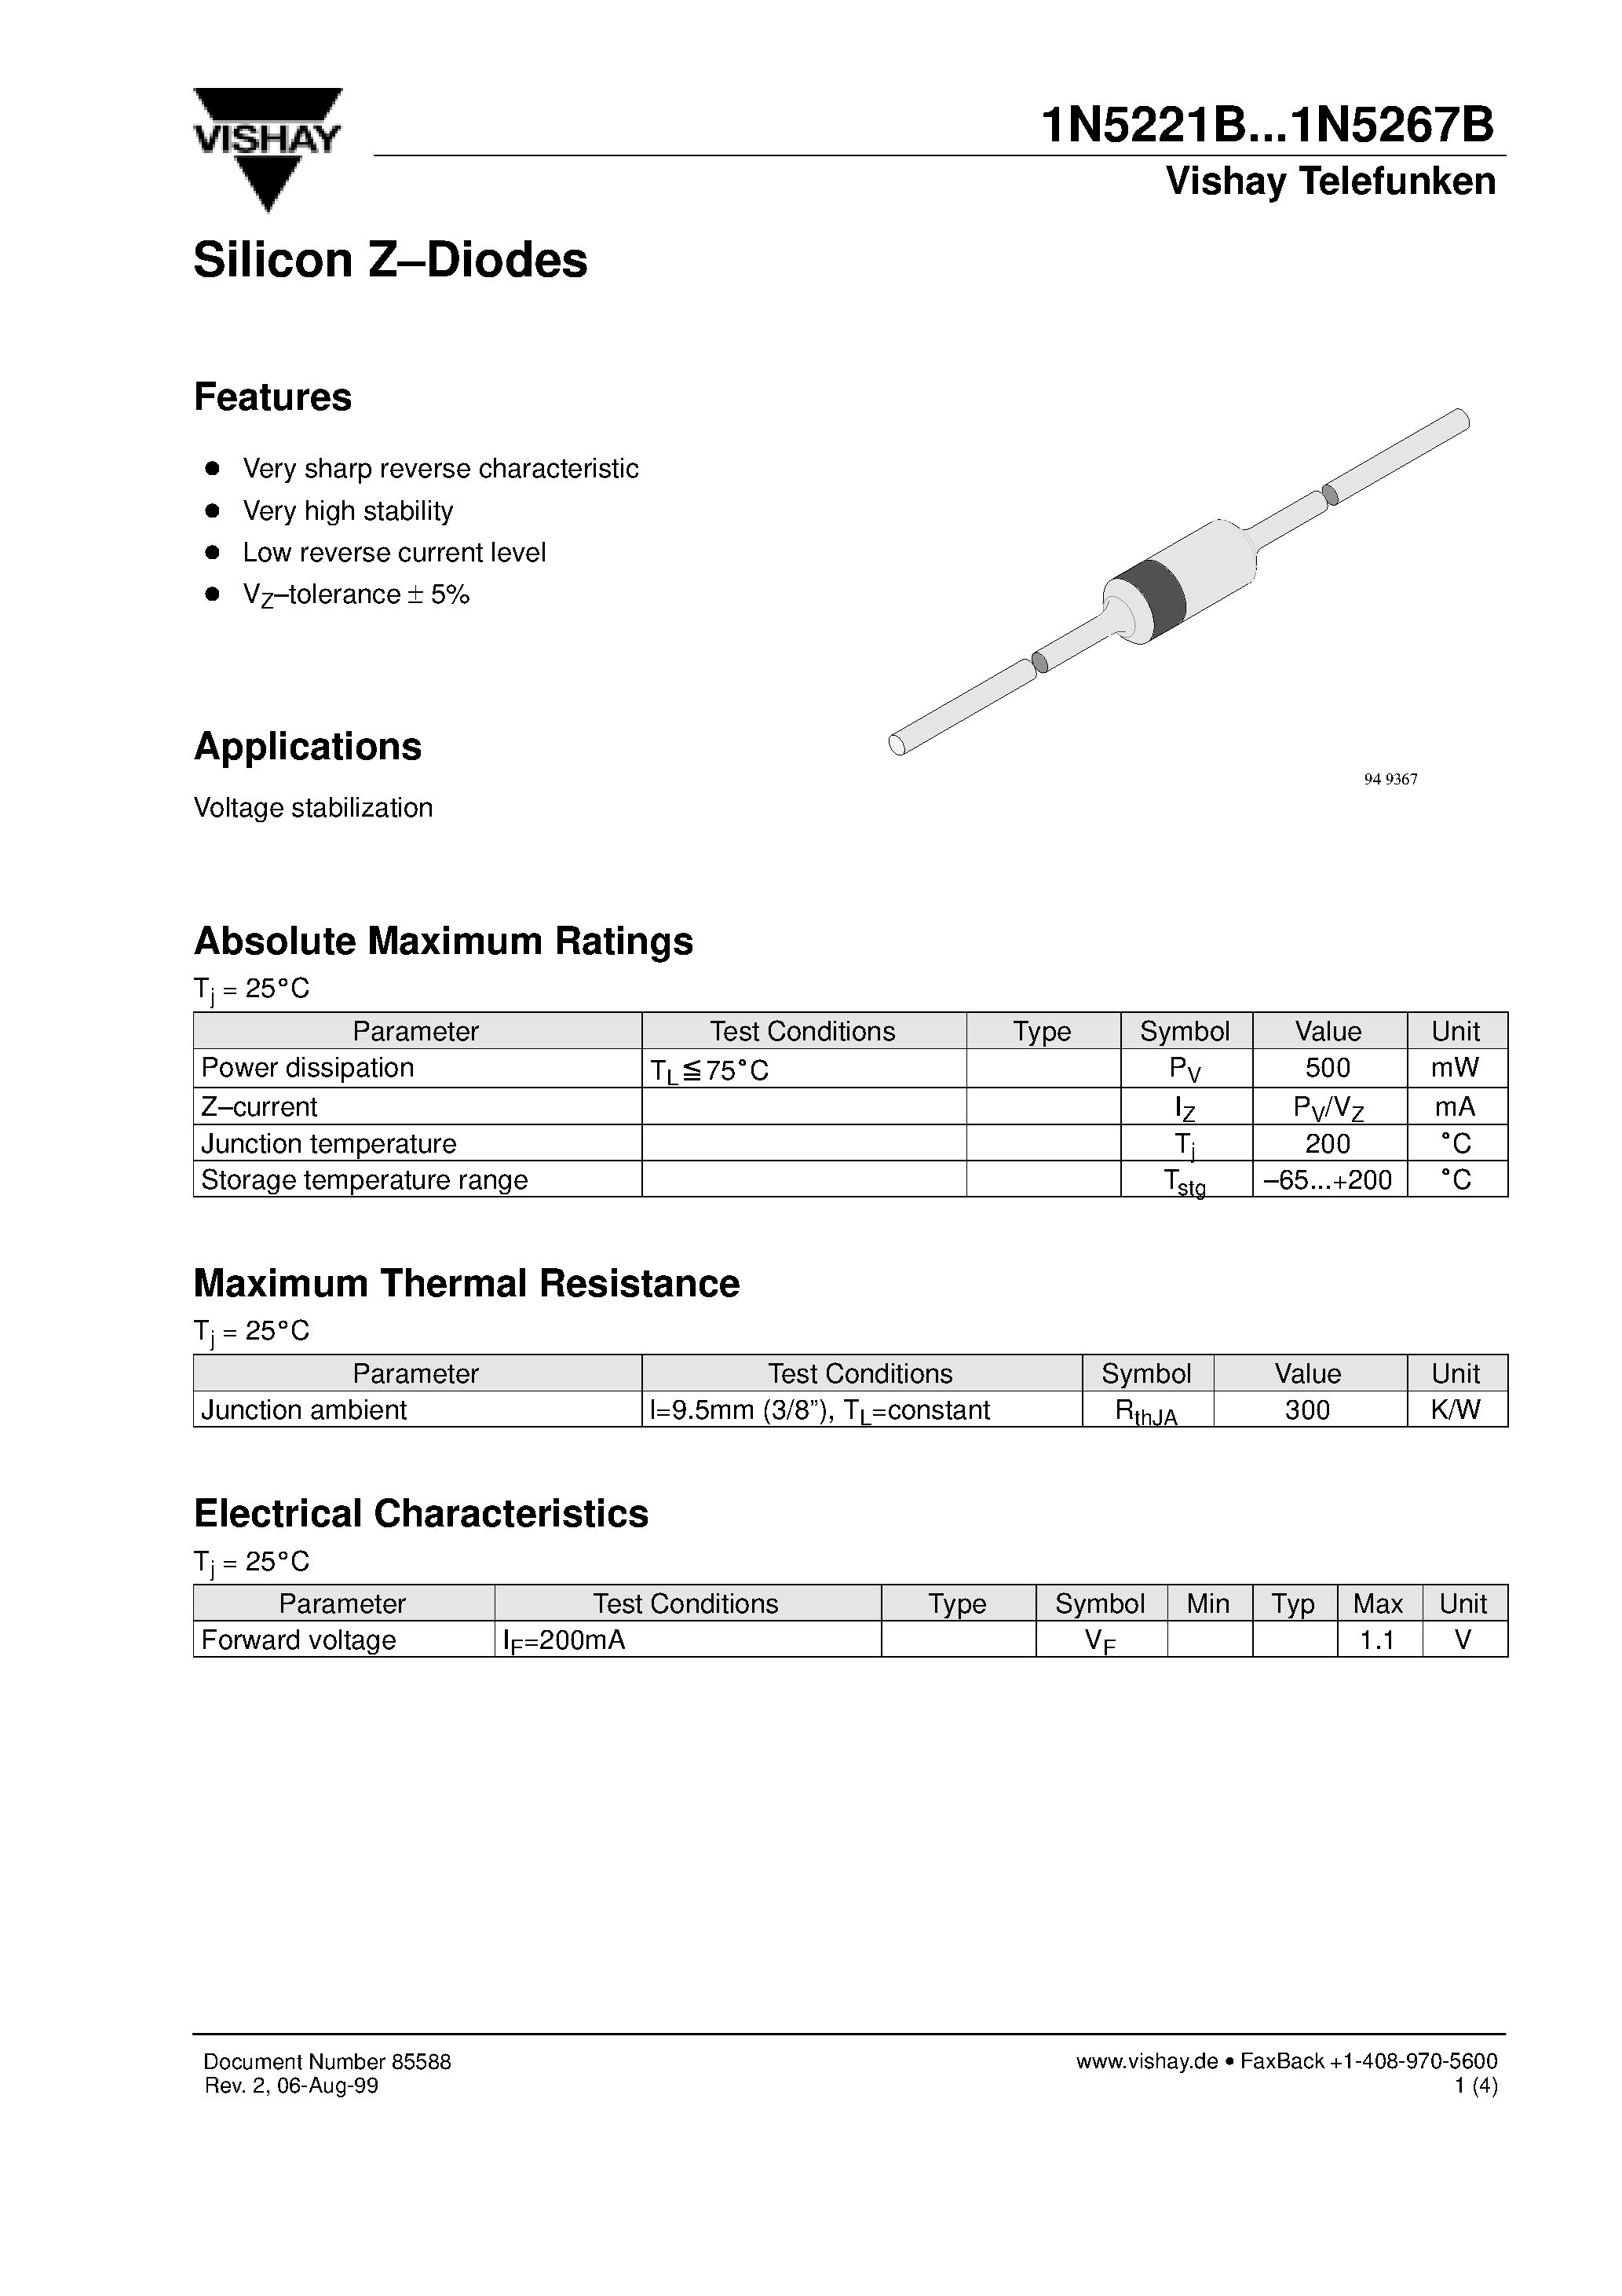 Datasheet 1N5247B - Silicon Z-Diodes page 1